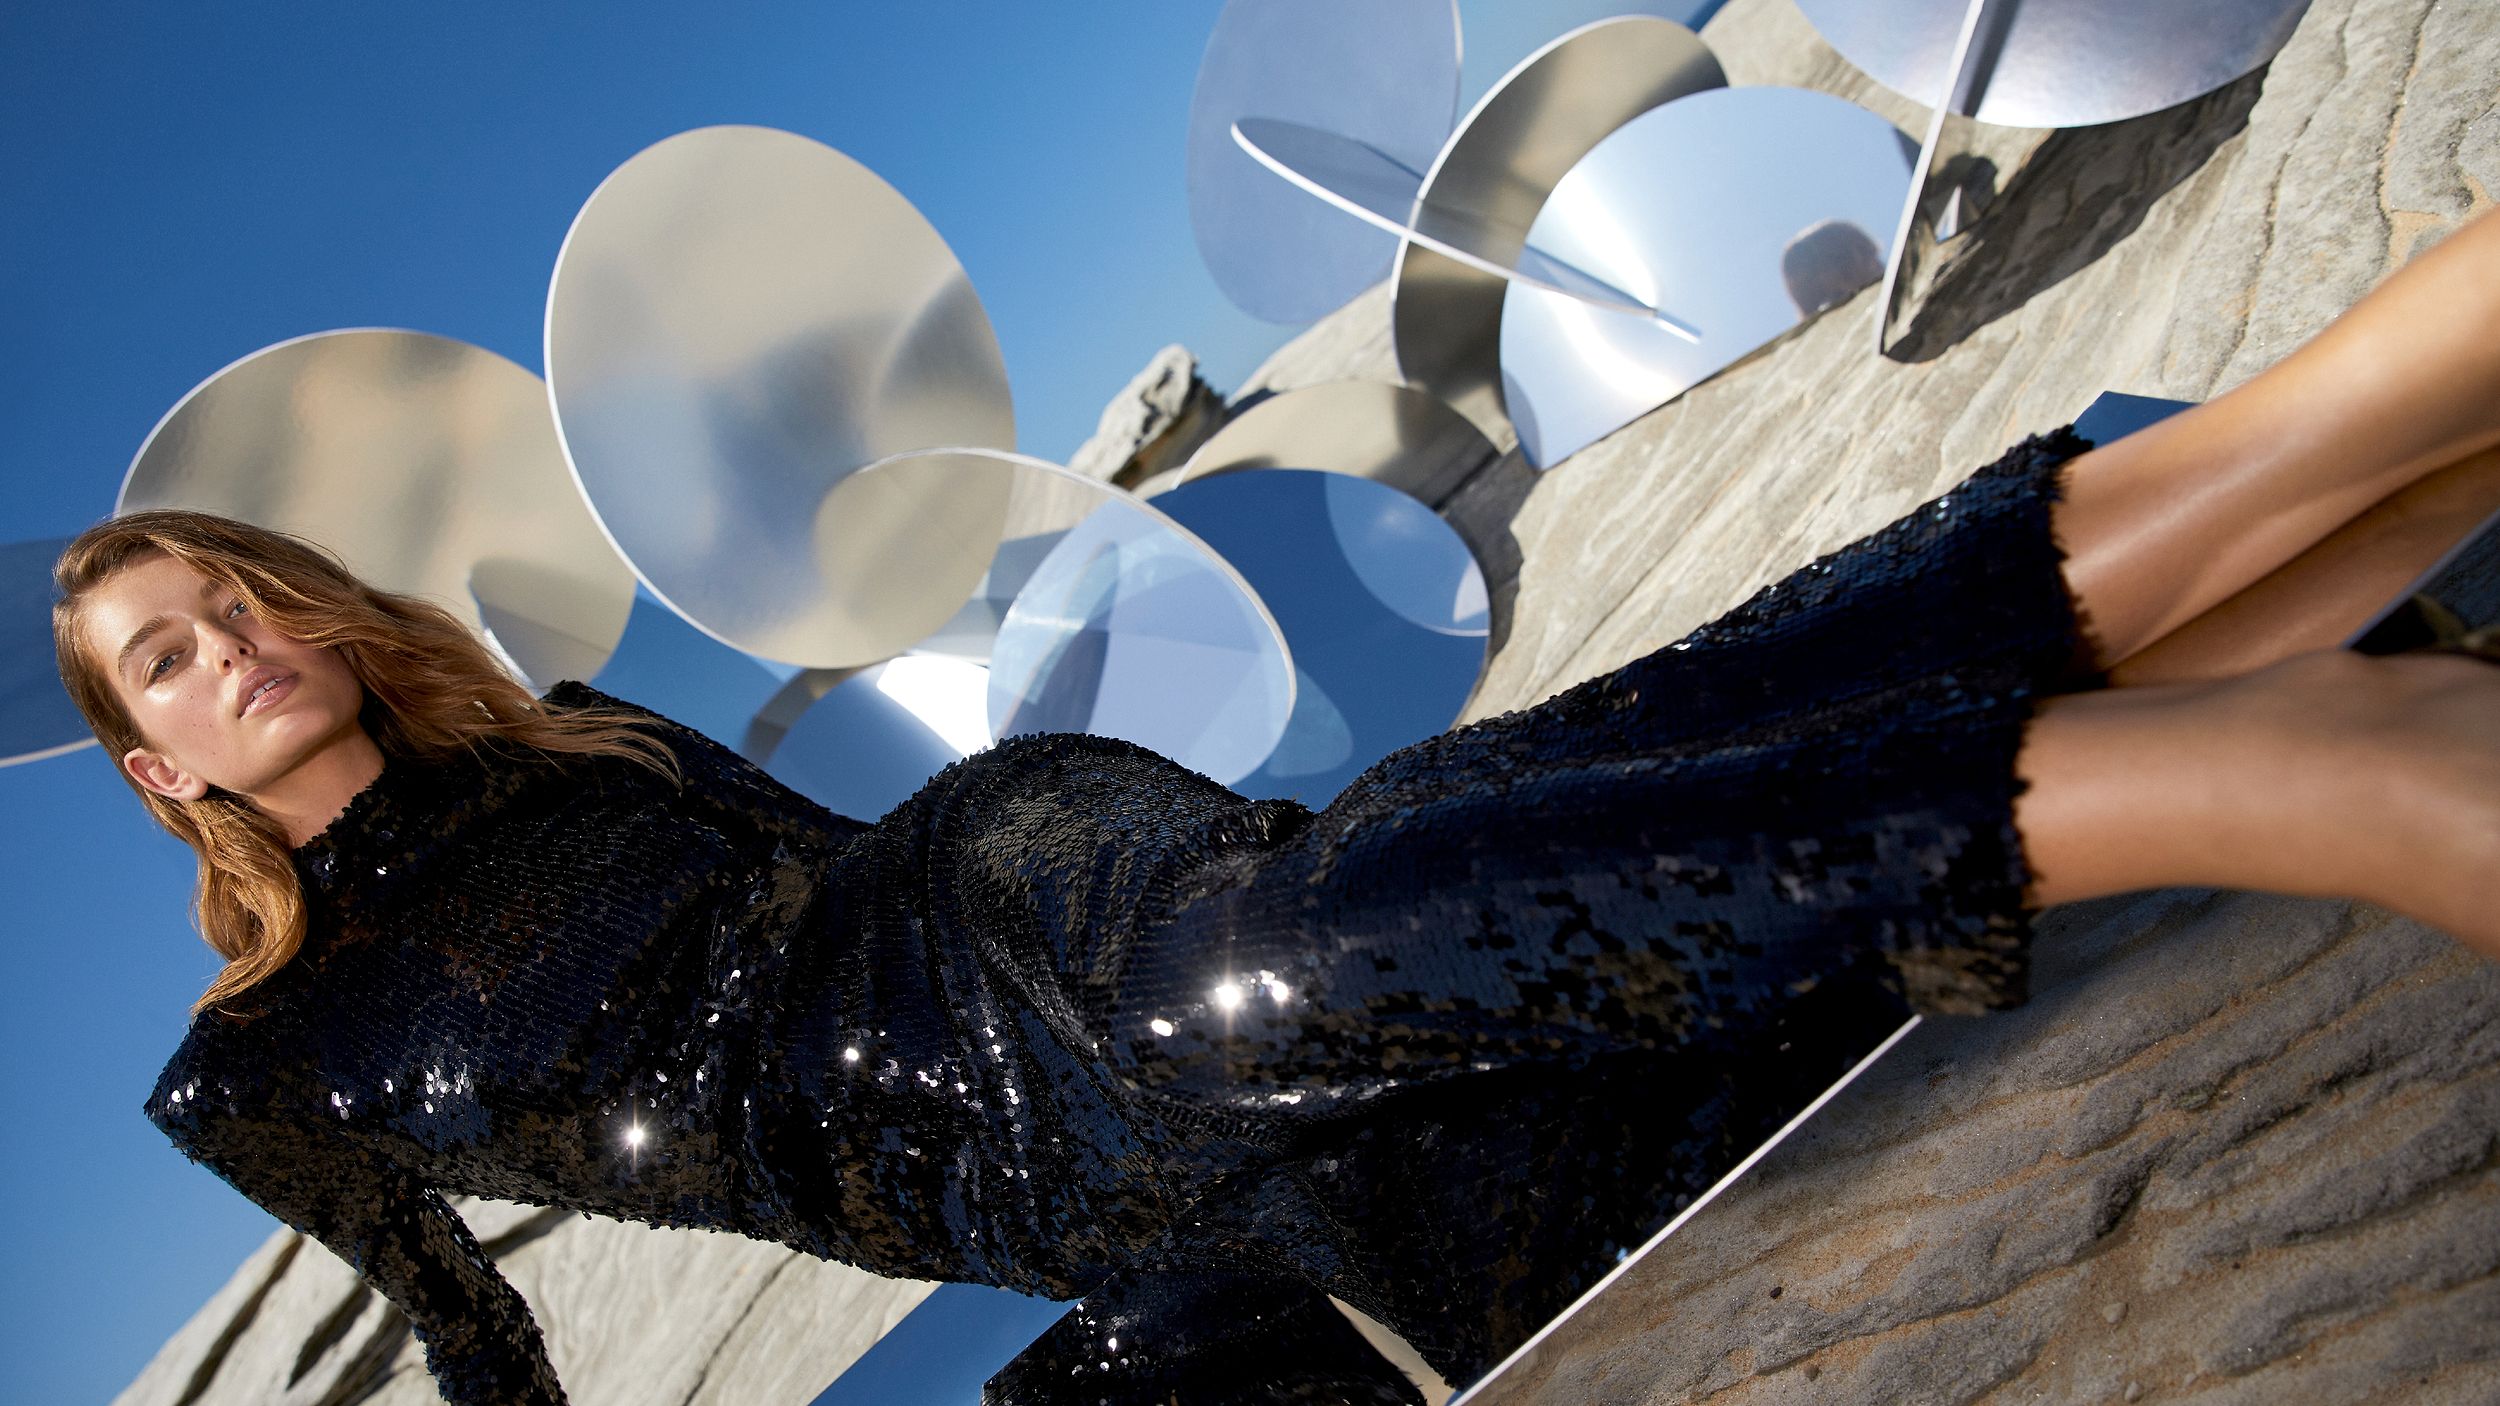 Model reclined amongst mirrored sculptures wearing a black long-sleeved sequin gown